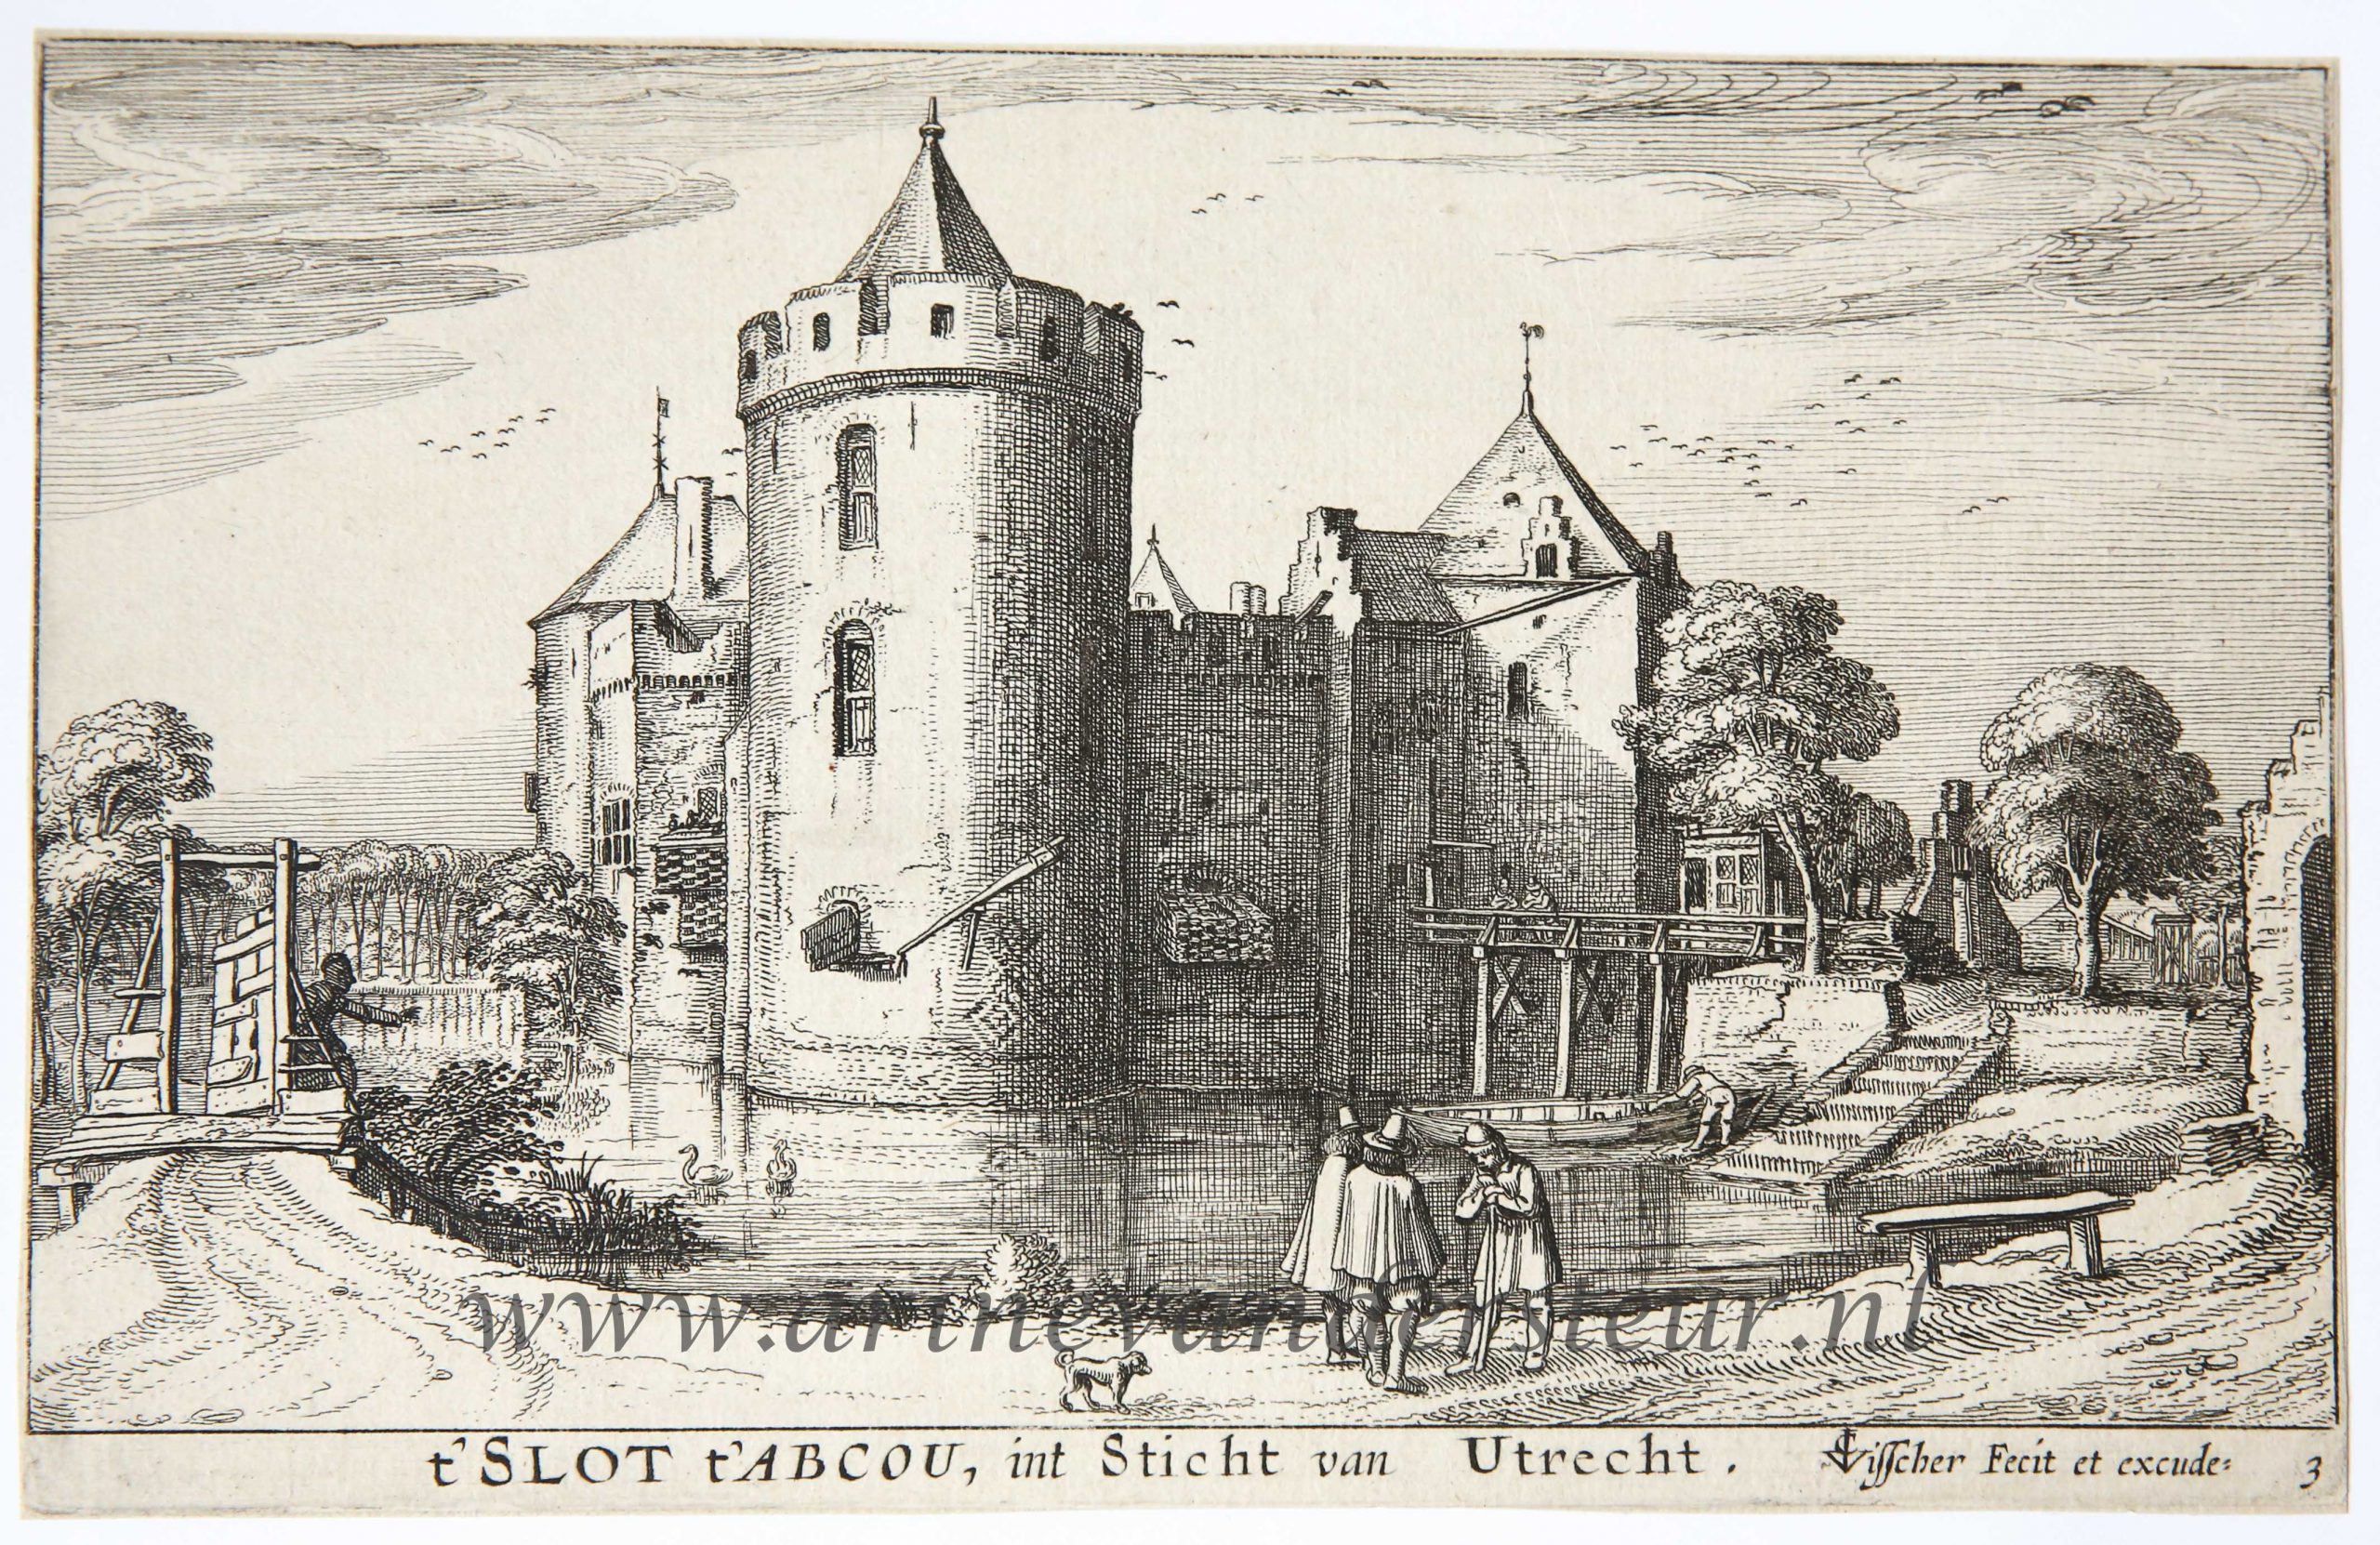 [Original etching/ets by Claes Jansz Visscher] The castle in Abcoude / Het kasteel in Abcoude. Date of publishing print 1617.